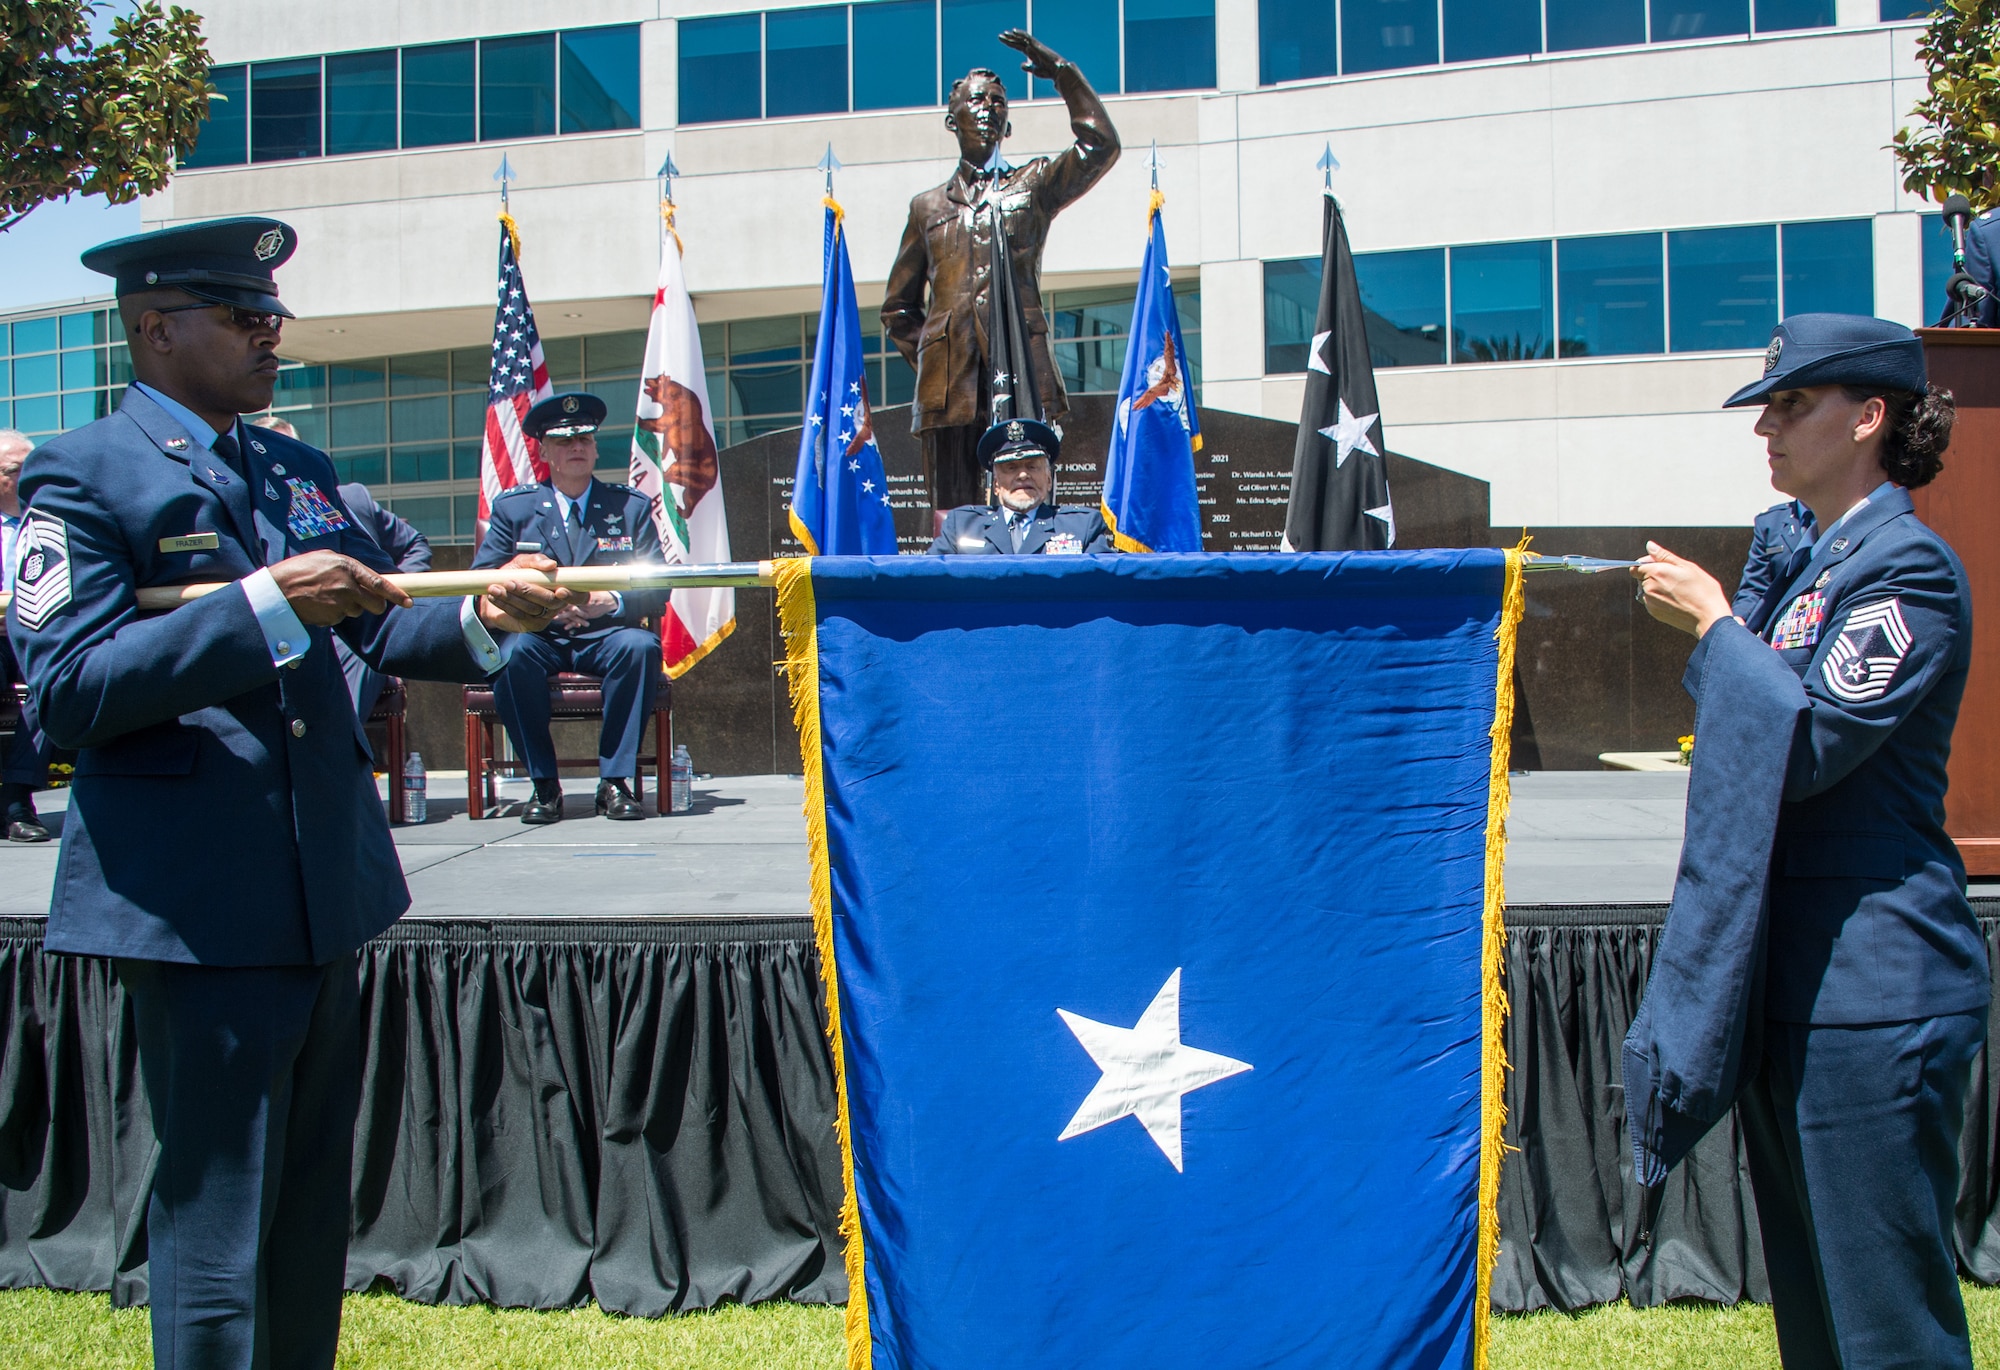 Space Force Chief Master Sgt. Willie Frazier (left) and Air Force Chief Master Sgt. Sarah Morgan unfurl the brigadier general officer’s flag at the Space Systems Command courtyard. The ceremony was held for astronaut and fighter pilot retired Brig. Gen. Buzz Aldrin, who recently received an honorary promotion during a ceremony at Los Angeles Air Force Base, Calif., May 5, 2023. (U.S. Space Force photo by Van Ha)